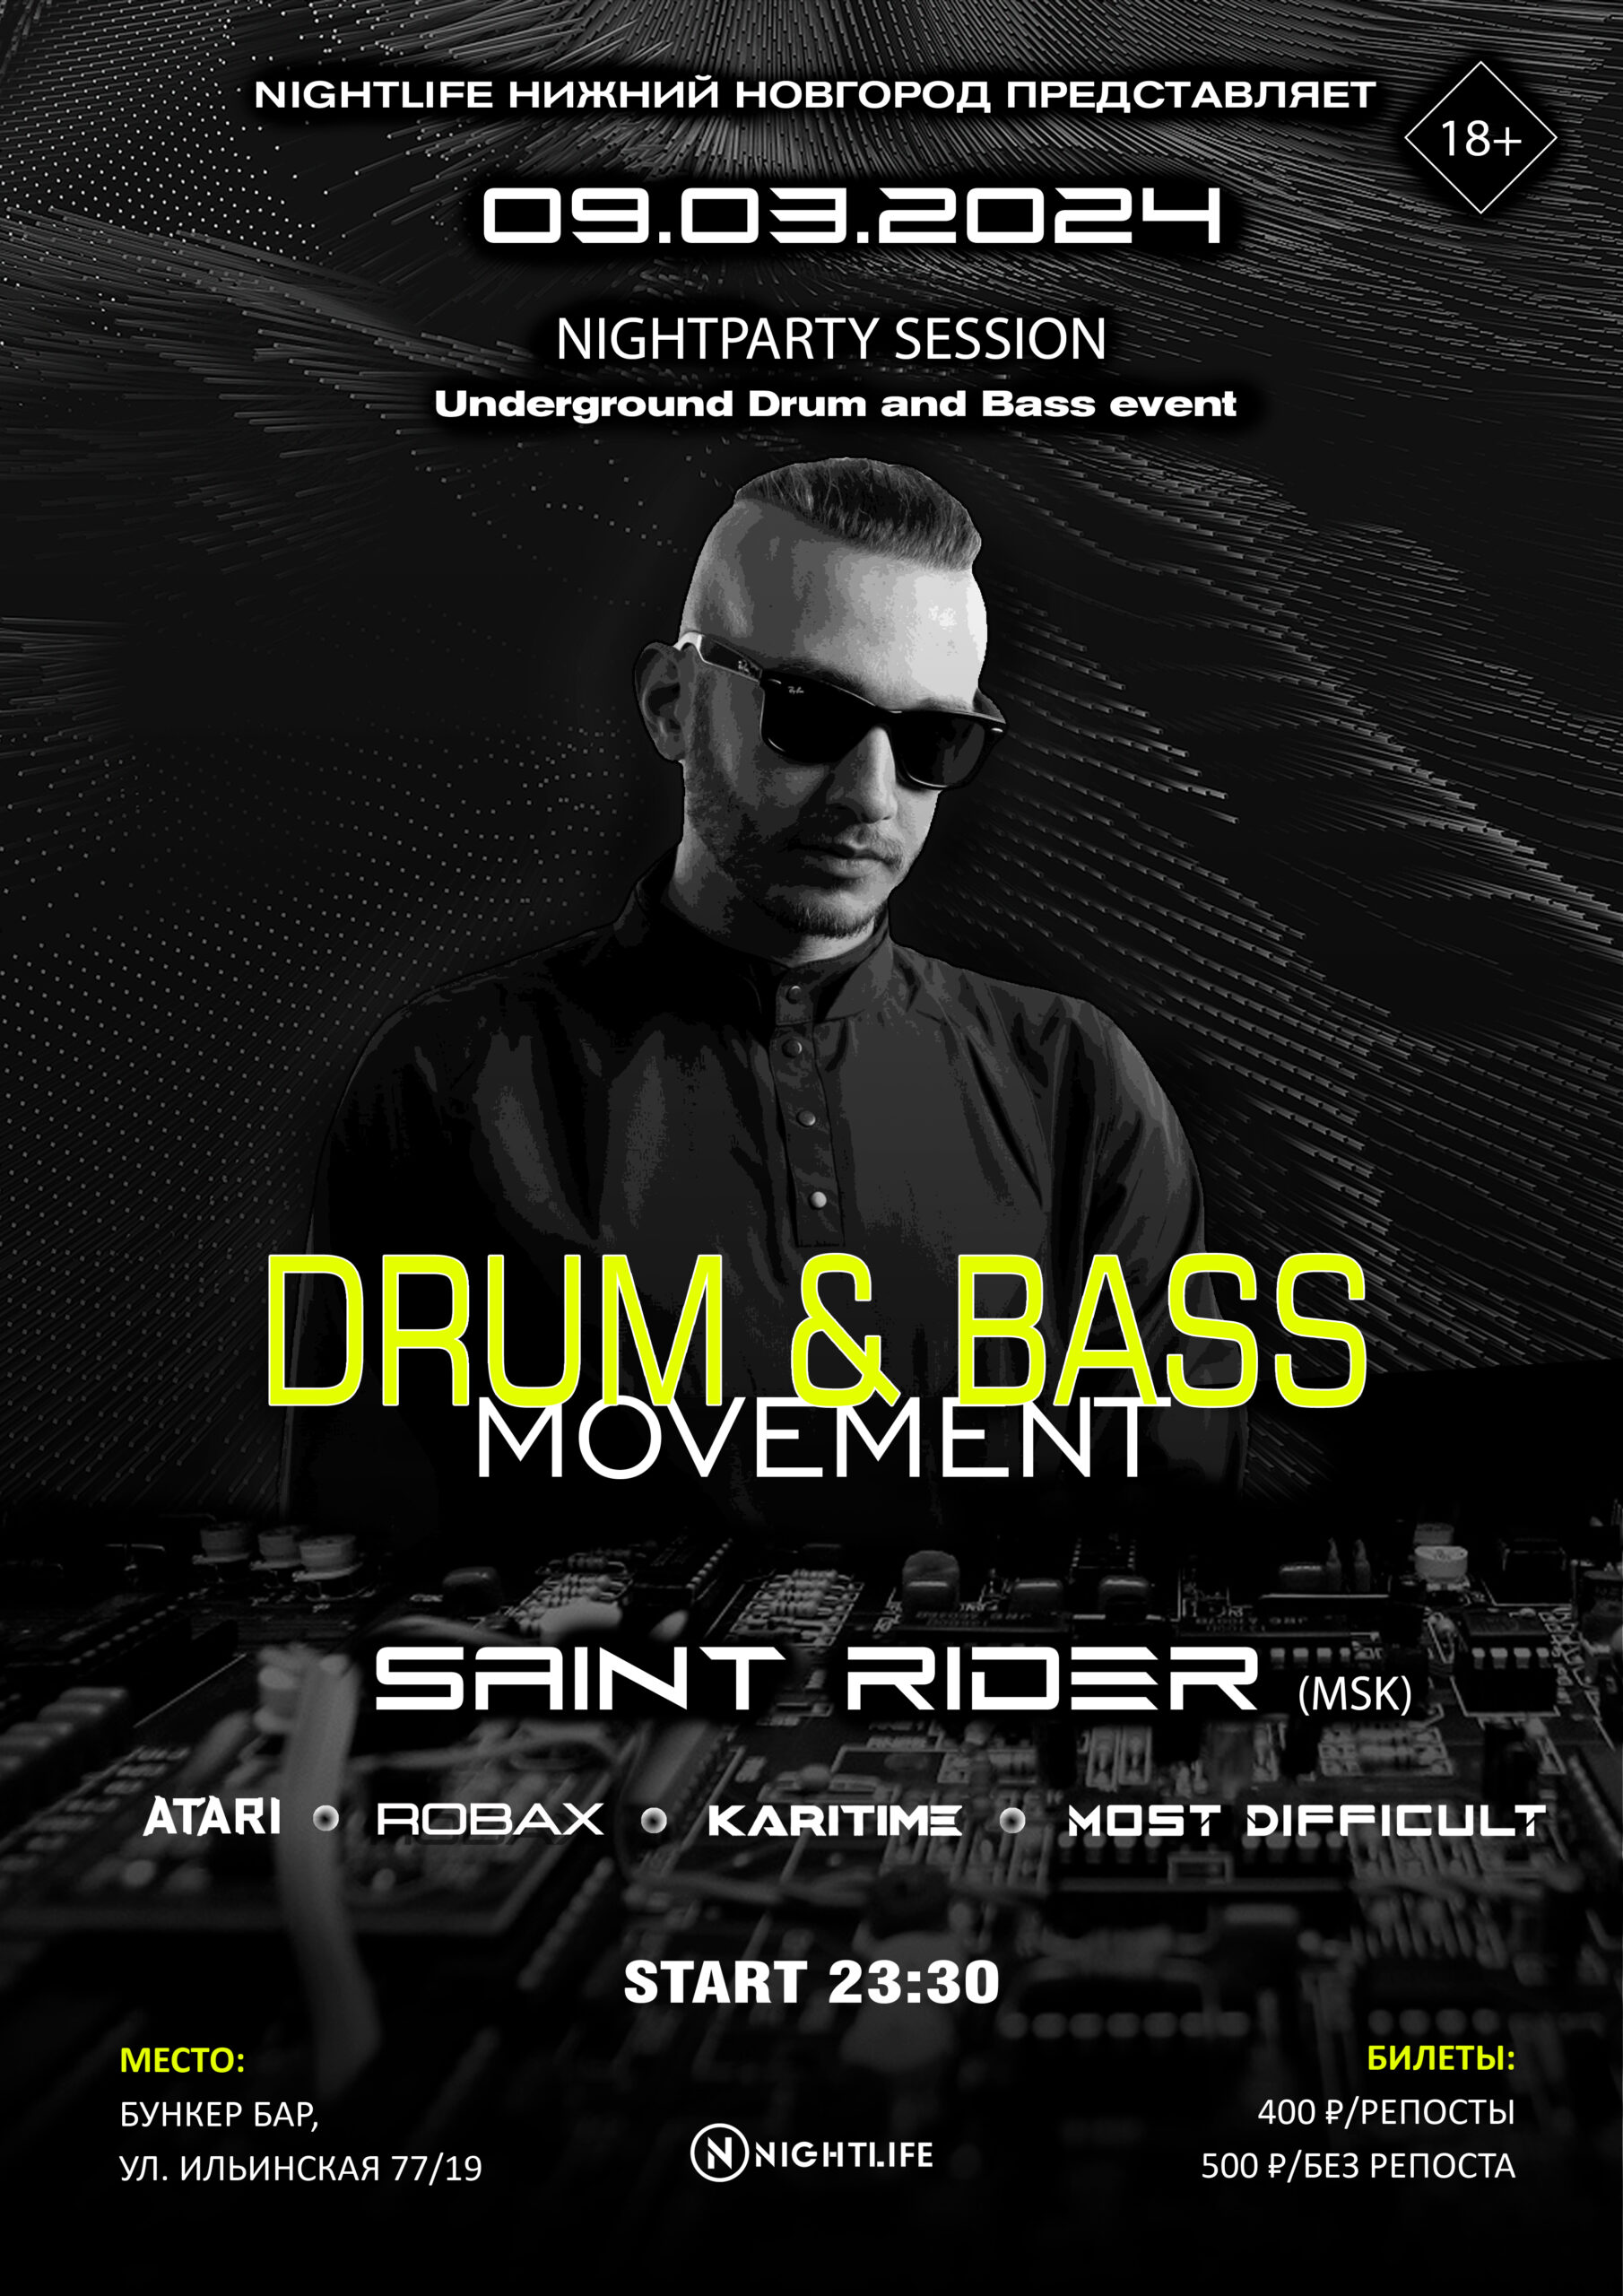 Nightparty session: Drum & Bass Movement